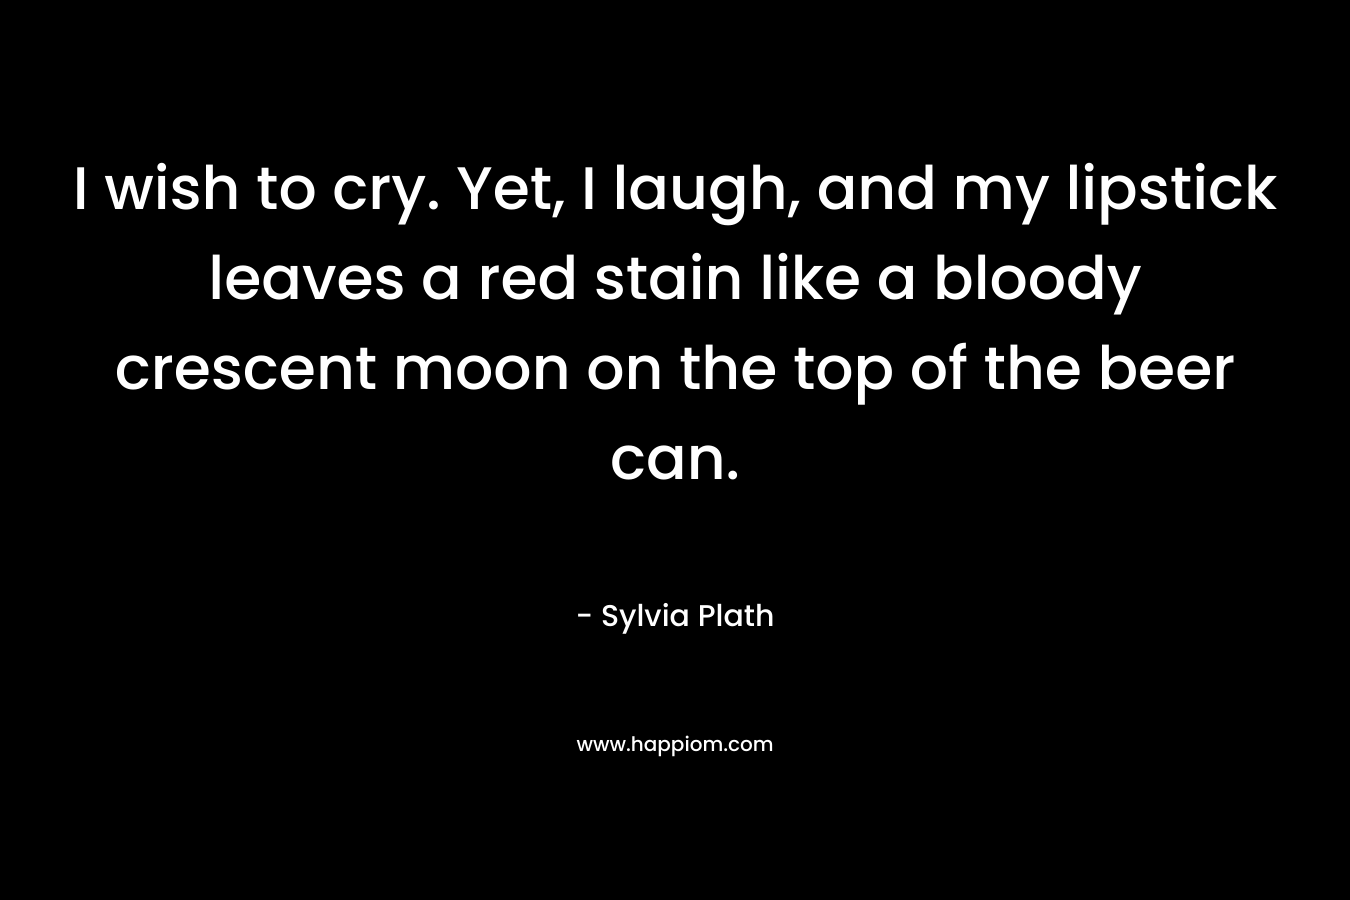 I wish to cry. Yet, I laugh, and my lipstick leaves a red stain like a bloody crescent moon on the top of the beer can.